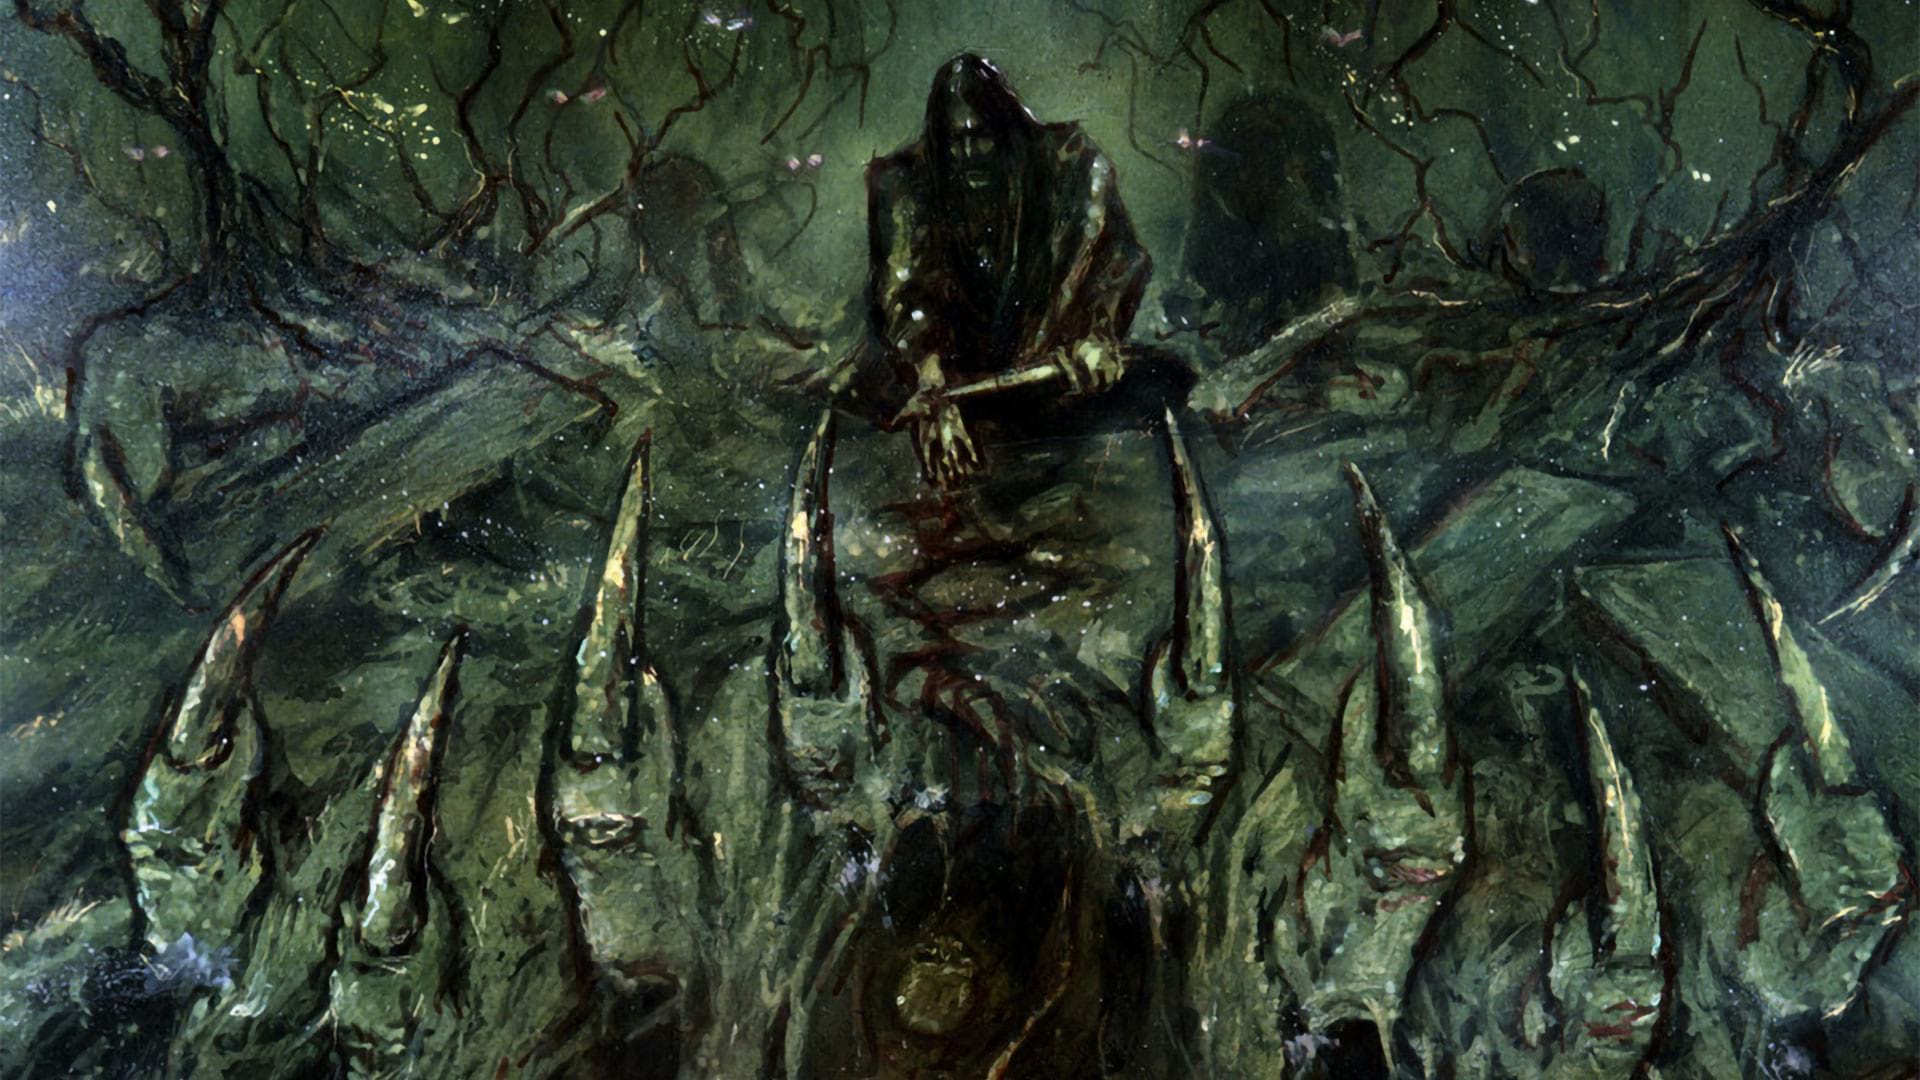 20 Years Ago: HORNA release Sudentaival